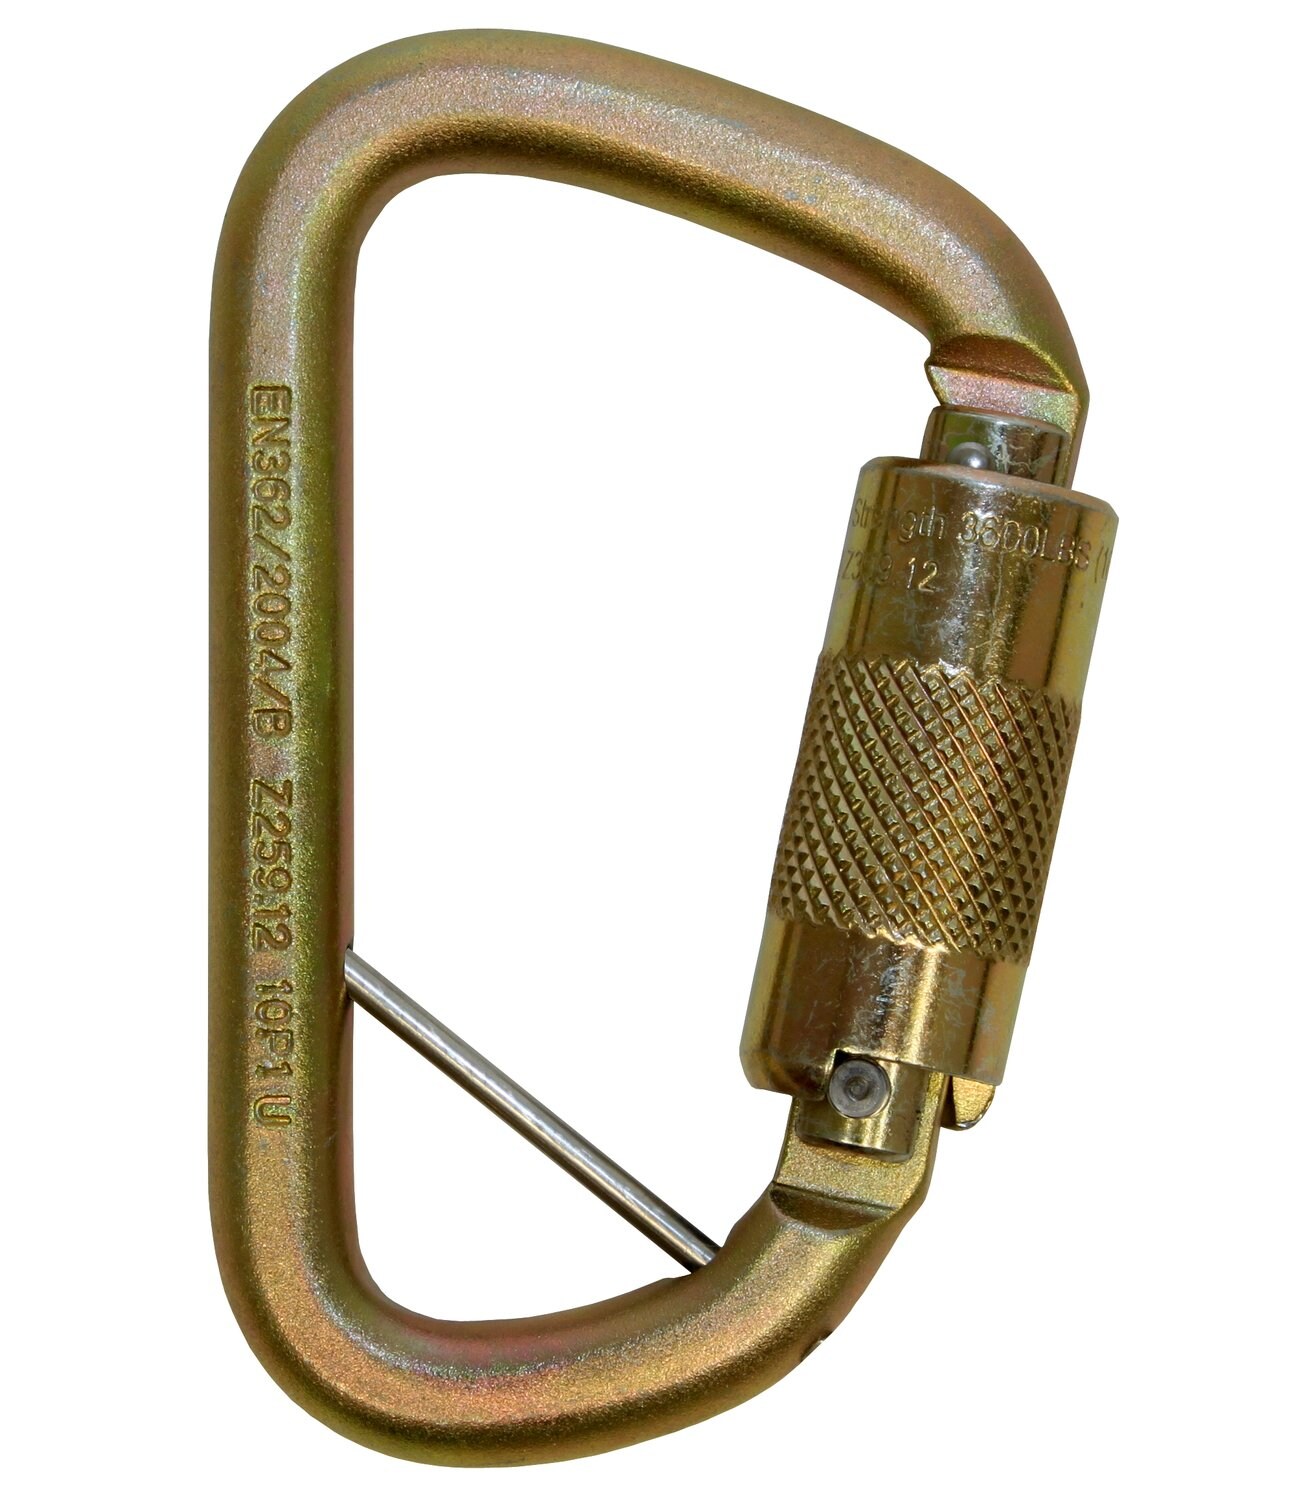 7100221696 - 3M DBI-SALA Rollgliss Technical Rescue Offset D Fall Arrest Carabiner
with Captive Eye, 2000117, Gold, Medium